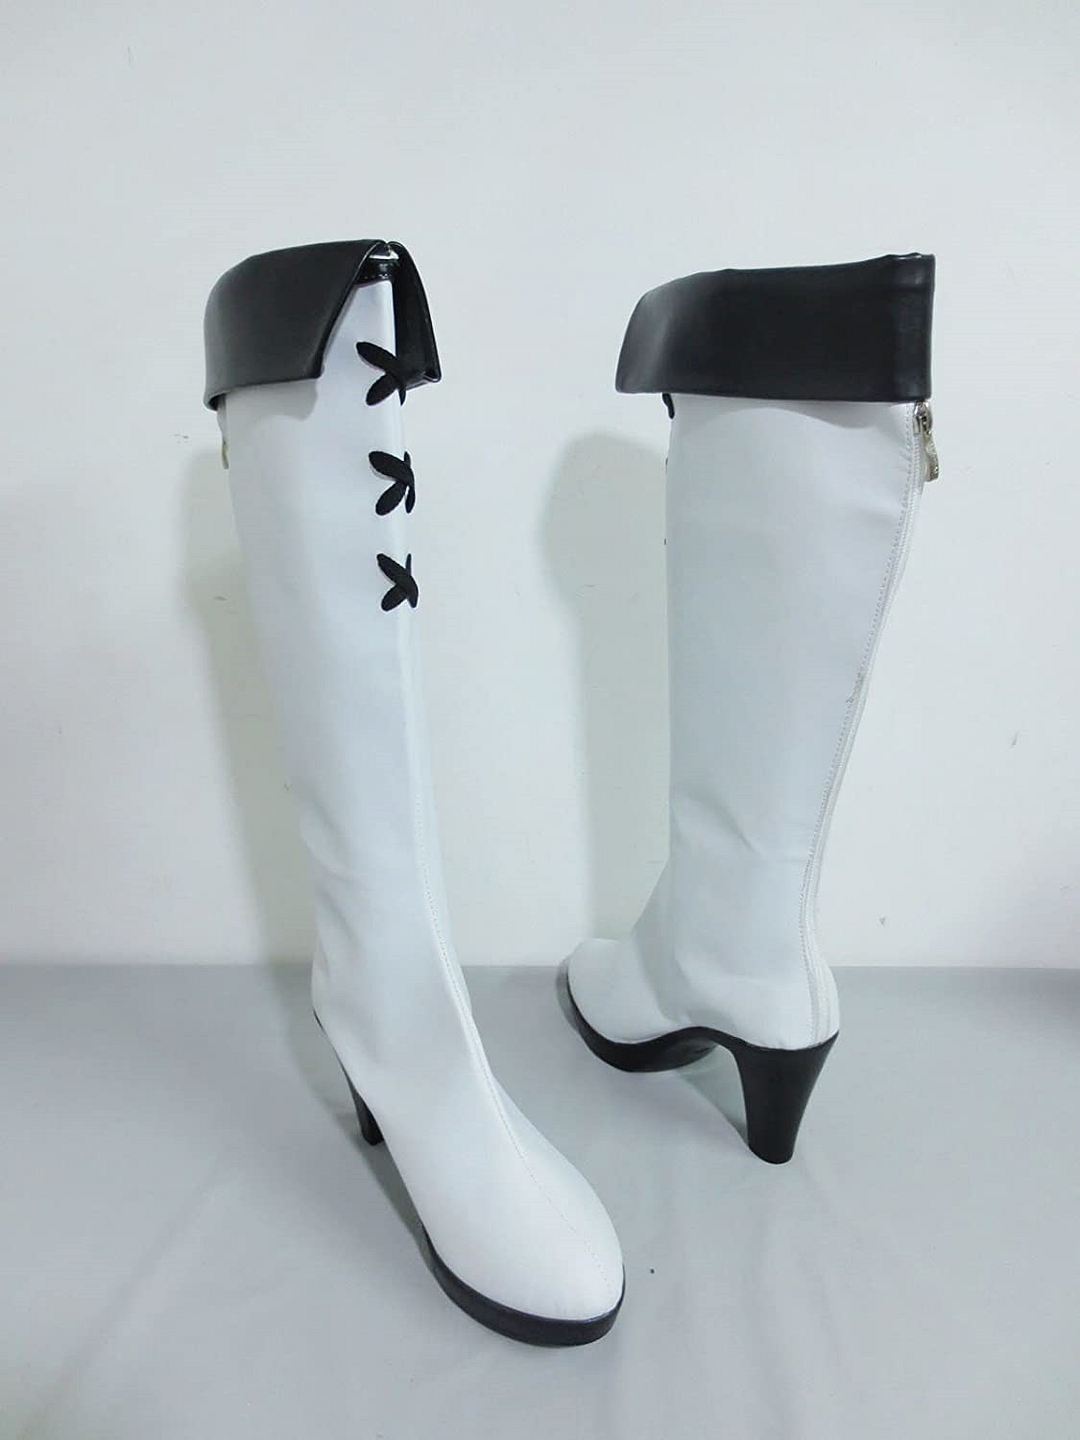 Akame Ga Kill Esdeath Empire General Boots Cosplay Shoes